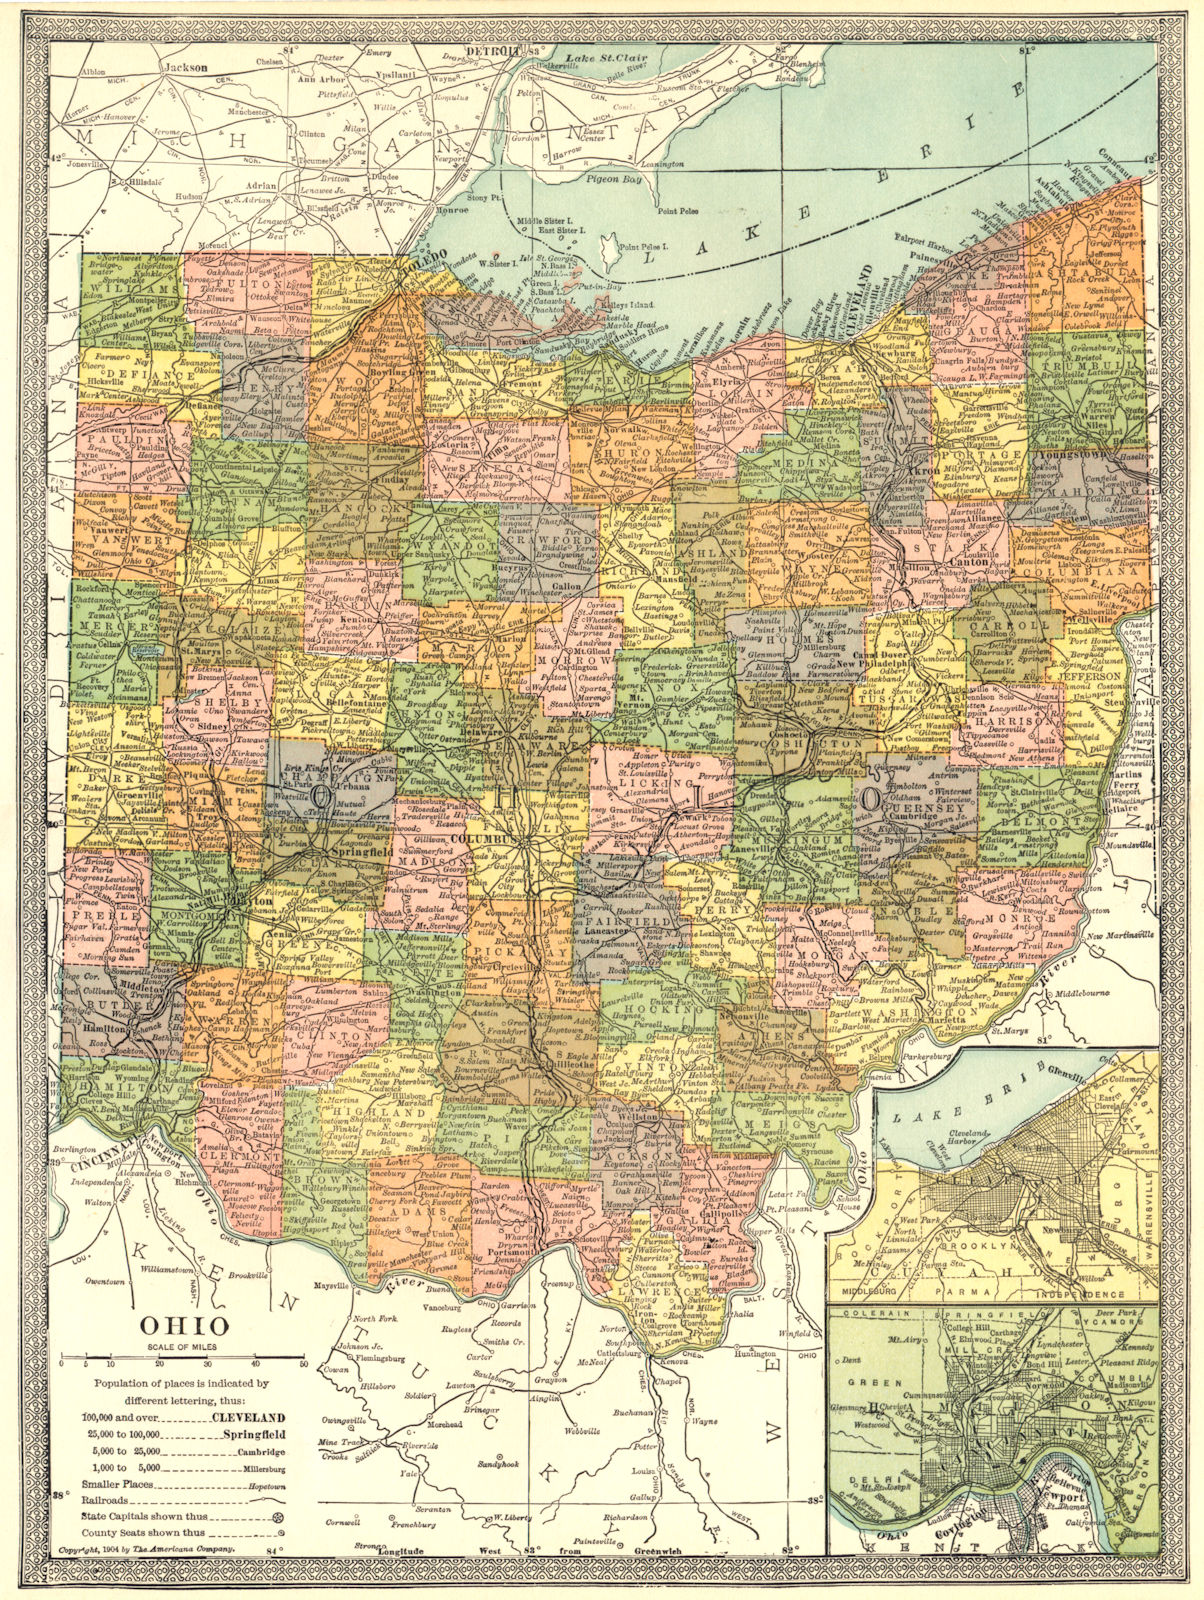 OHIO state map. Counties. Inset Cleveland & Cincinnati plans 1907 old